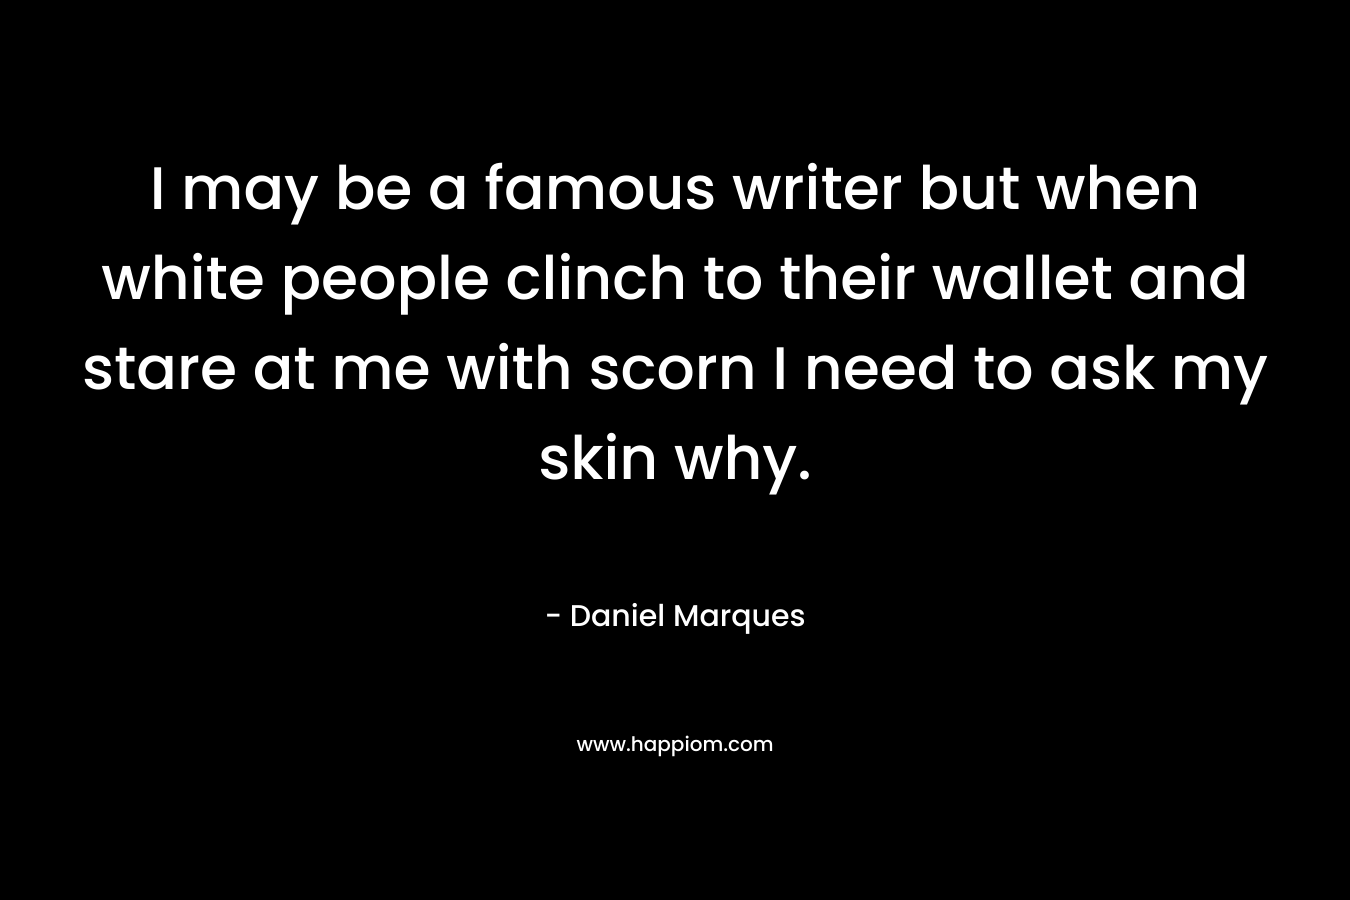 I may be a famous writer but when white people clinch to their wallet and stare at me with scorn I need to ask my skin why. – Daniel Marques